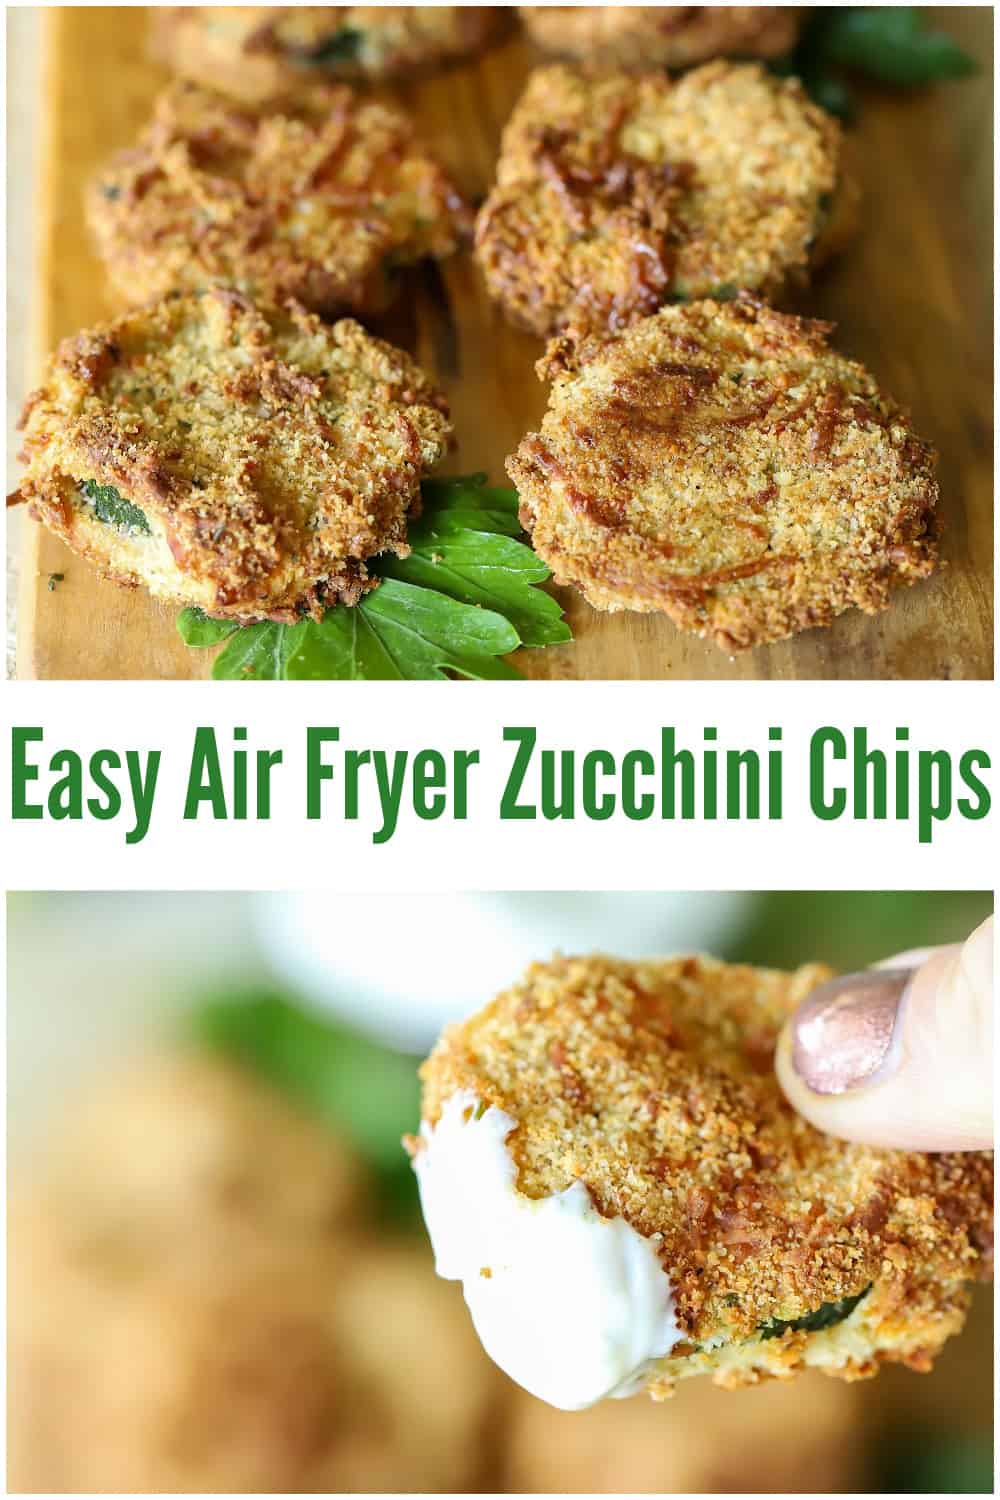 Easy Air Fryer Zucchini Chips are the perfect snack or side dish. Serve with a healthy Greek yogurt and ranch dipping sauce, and you won't stop snacking on them! #airfryer #appetizer #snack #zucchini #healthyrecipe #healthy via @jennikolaus